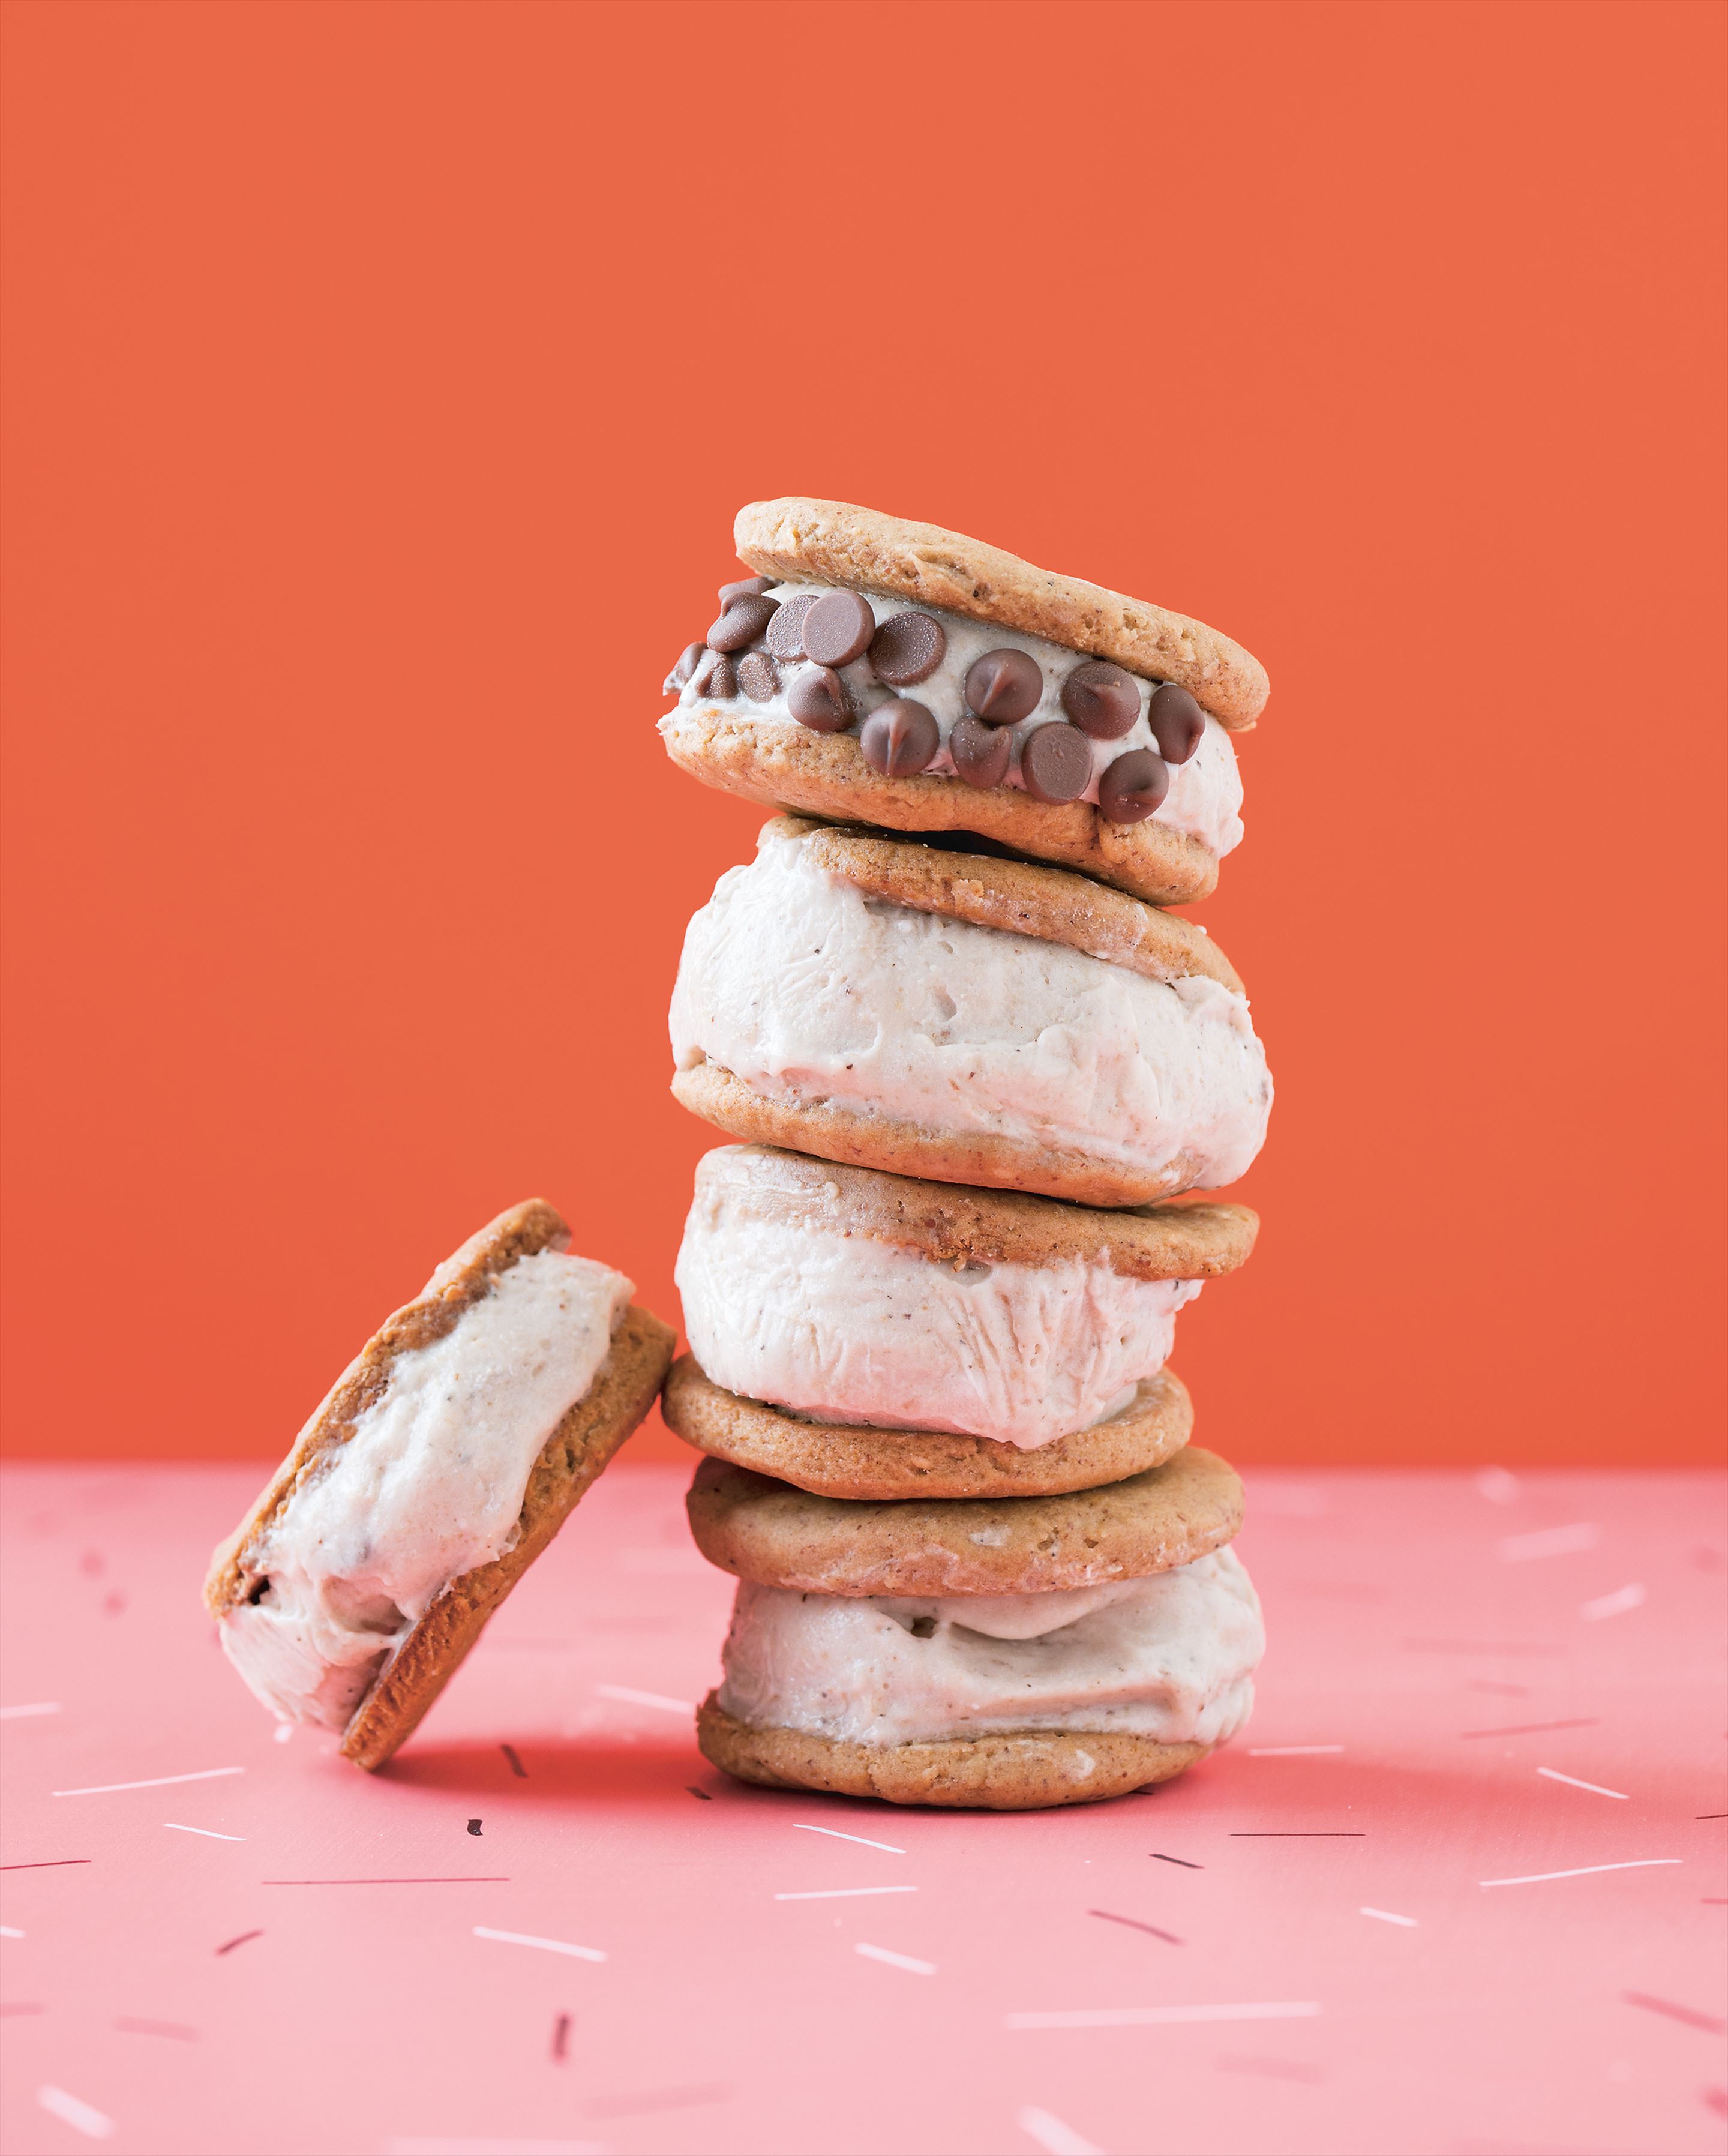 Banana chocolate chip chai nice-cream sandwiches with ginger biscuits